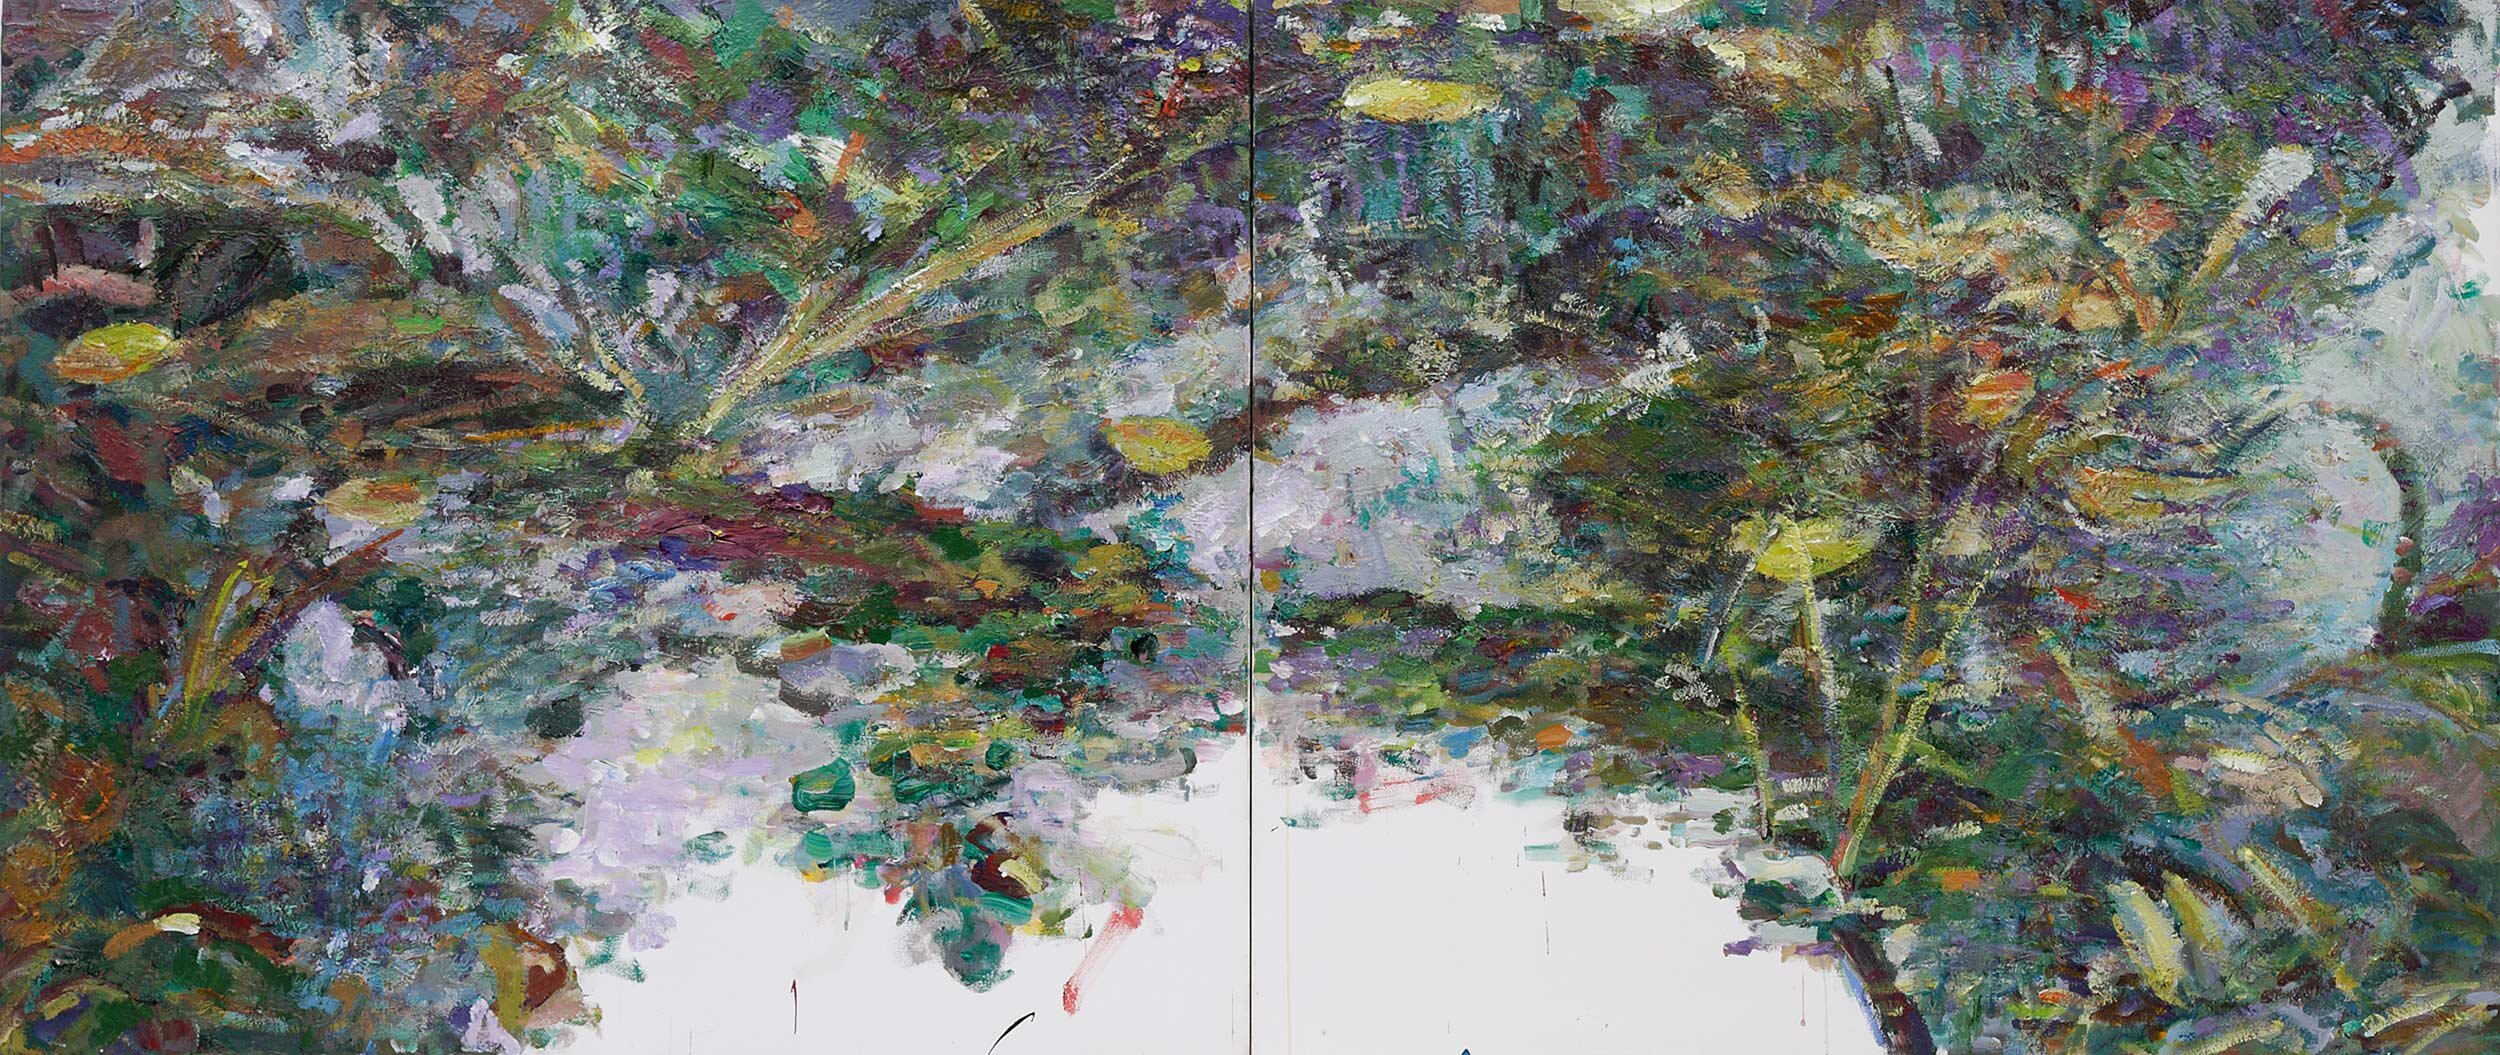 UNTITLED DIPTYCH NO. 1  acrylic on canvas  40 x 96"  2015